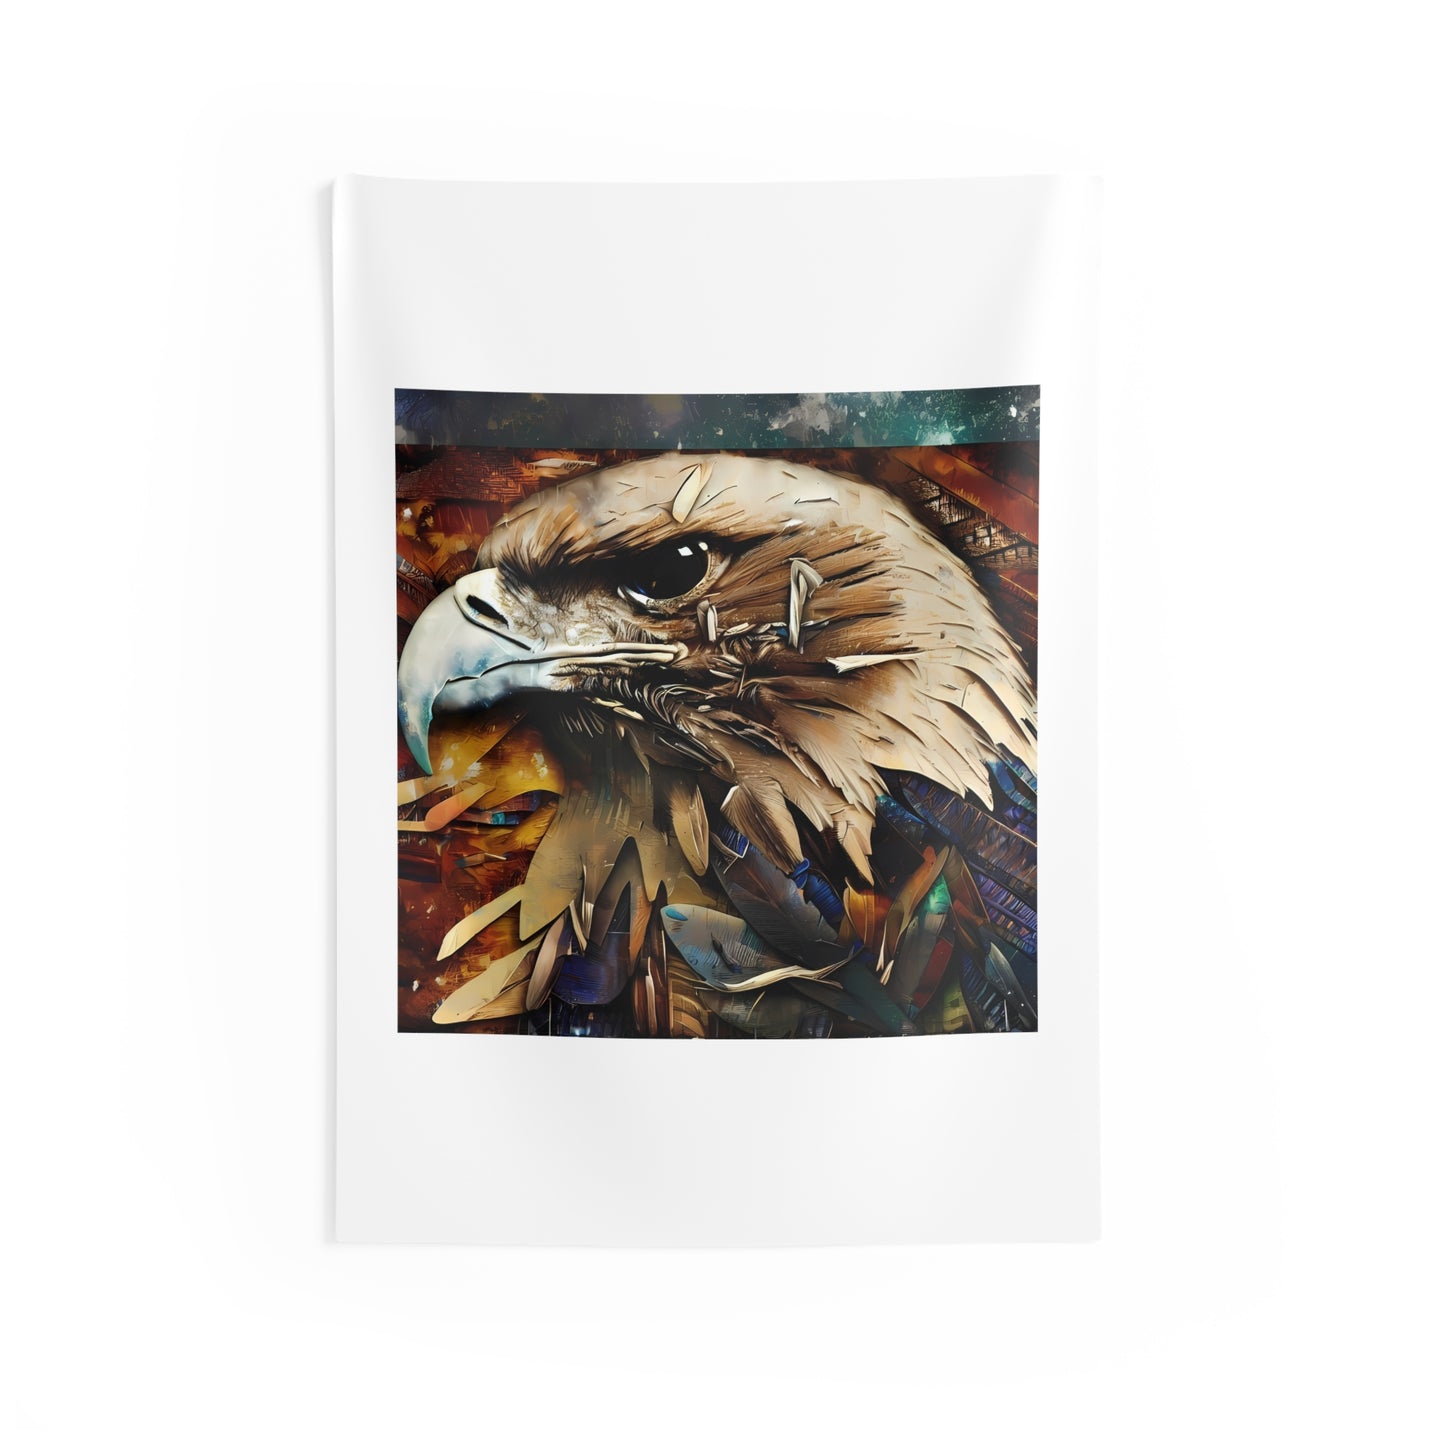 3D Modern Home Décor Fashion Eagle - I'm not bald, I'm just aerodynamic - Indoor Wall Tapestries